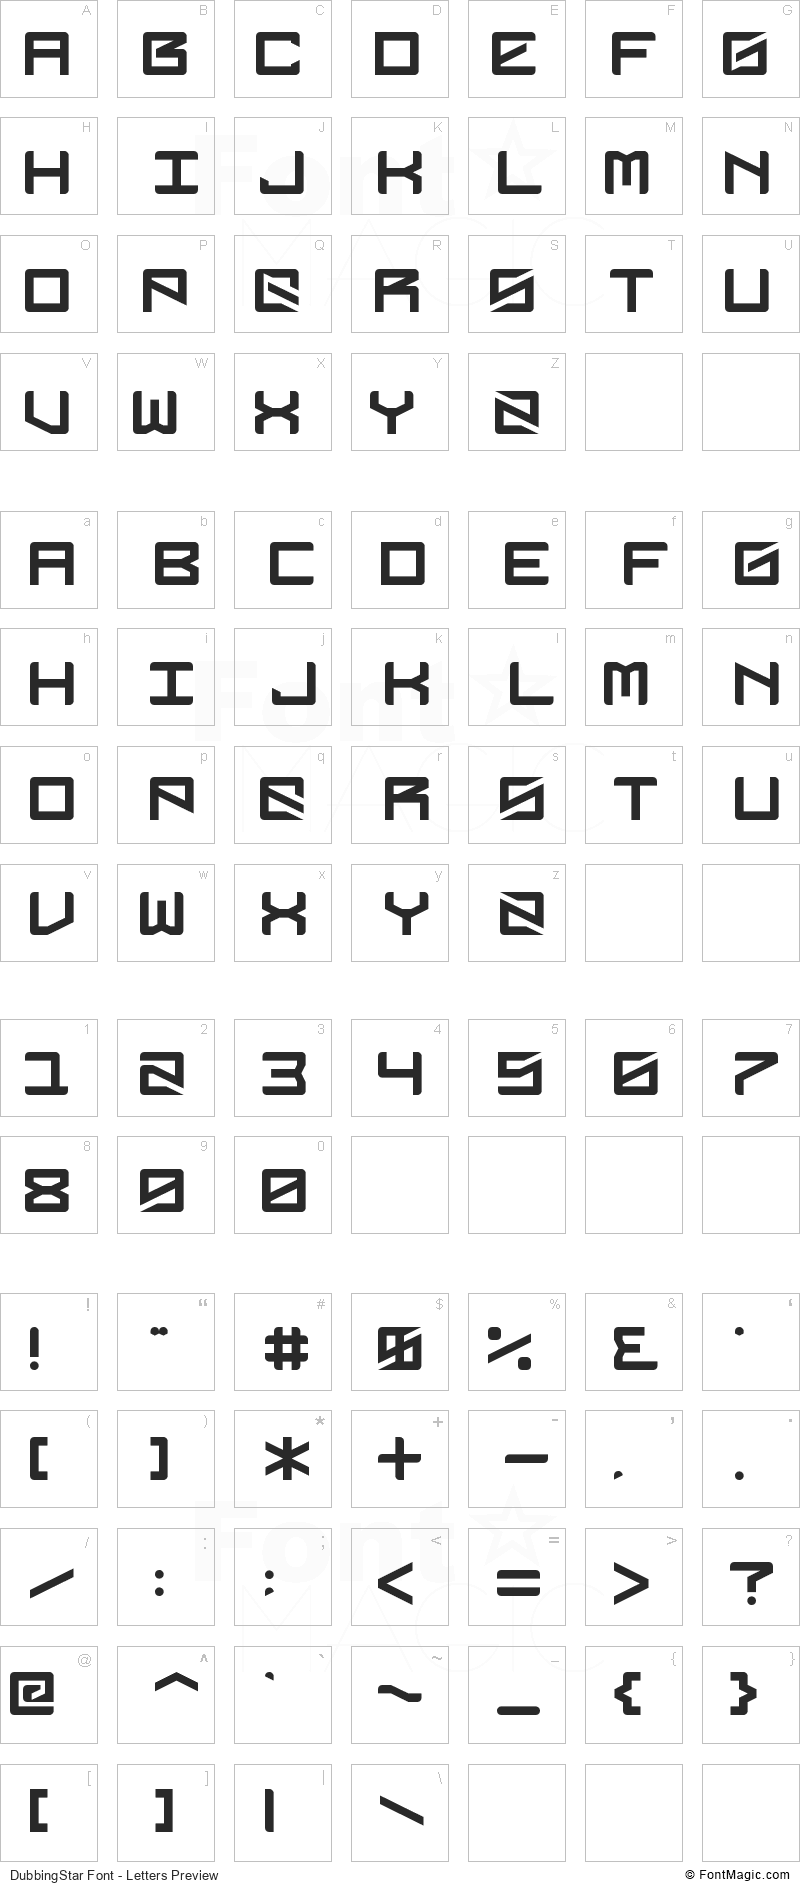 DubbingStar Font - All Latters Preview Chart